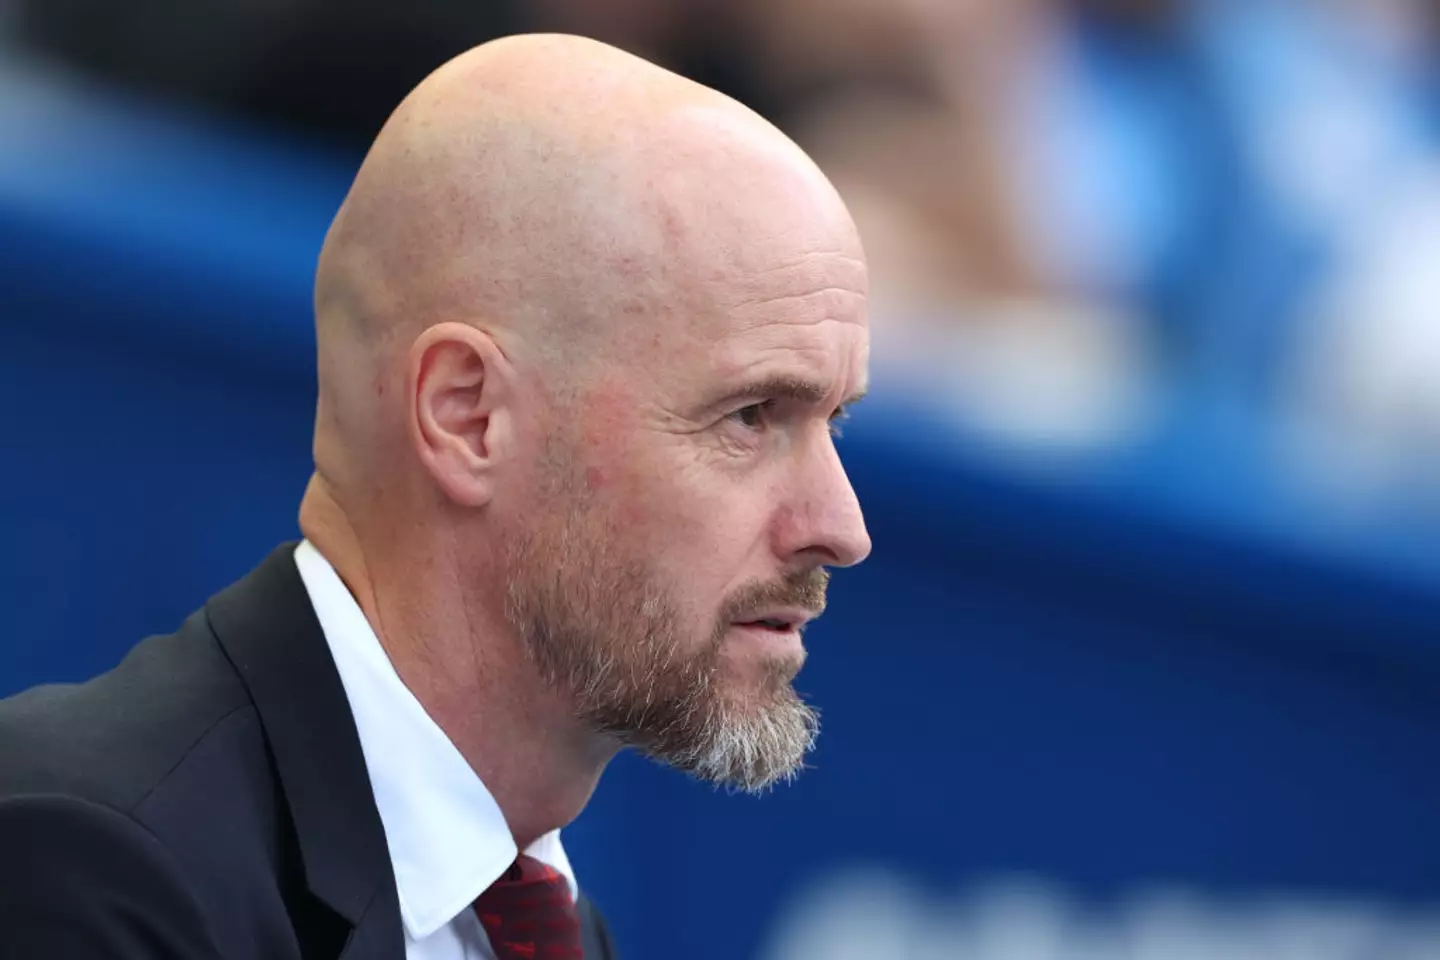 Reports claim Ten Hag is set to be sacked by United (Image: Getty)